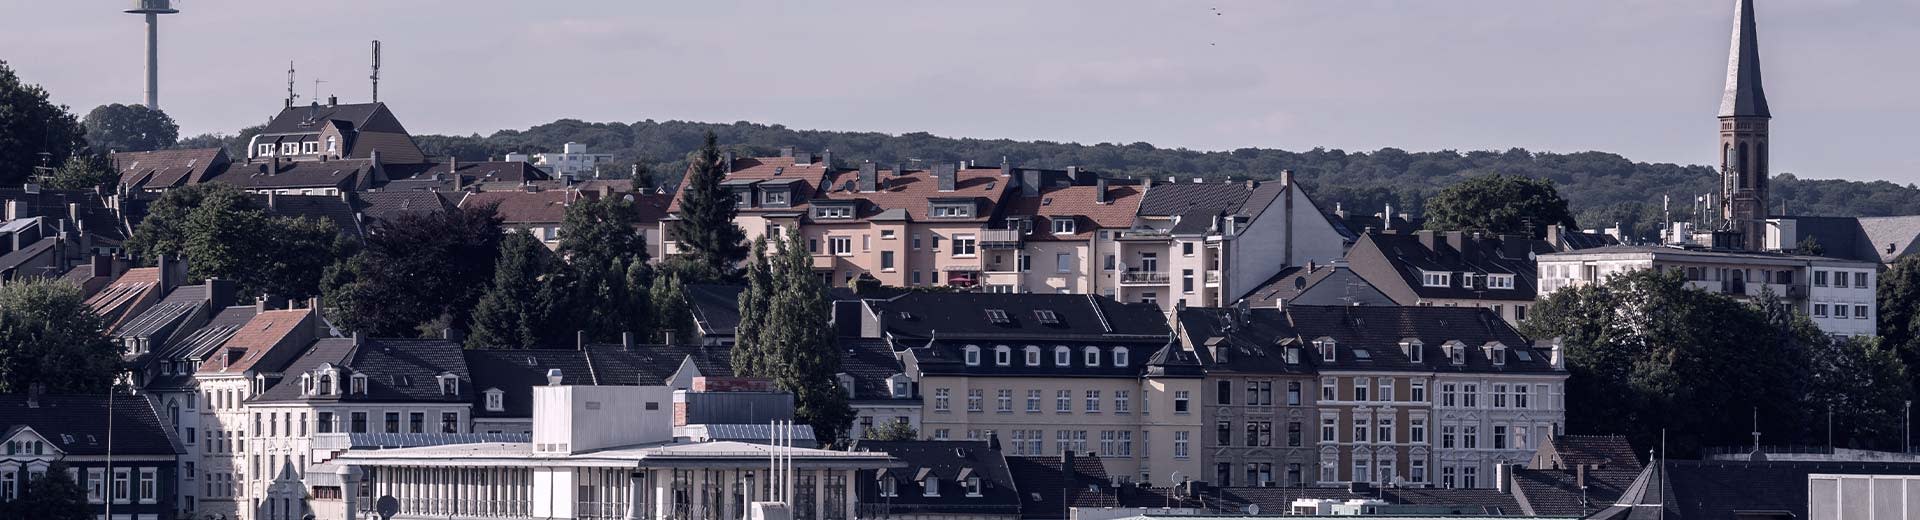 A medley of typical Wuppertal residential buildings in the foreground is contrasted by green hills in the distance.